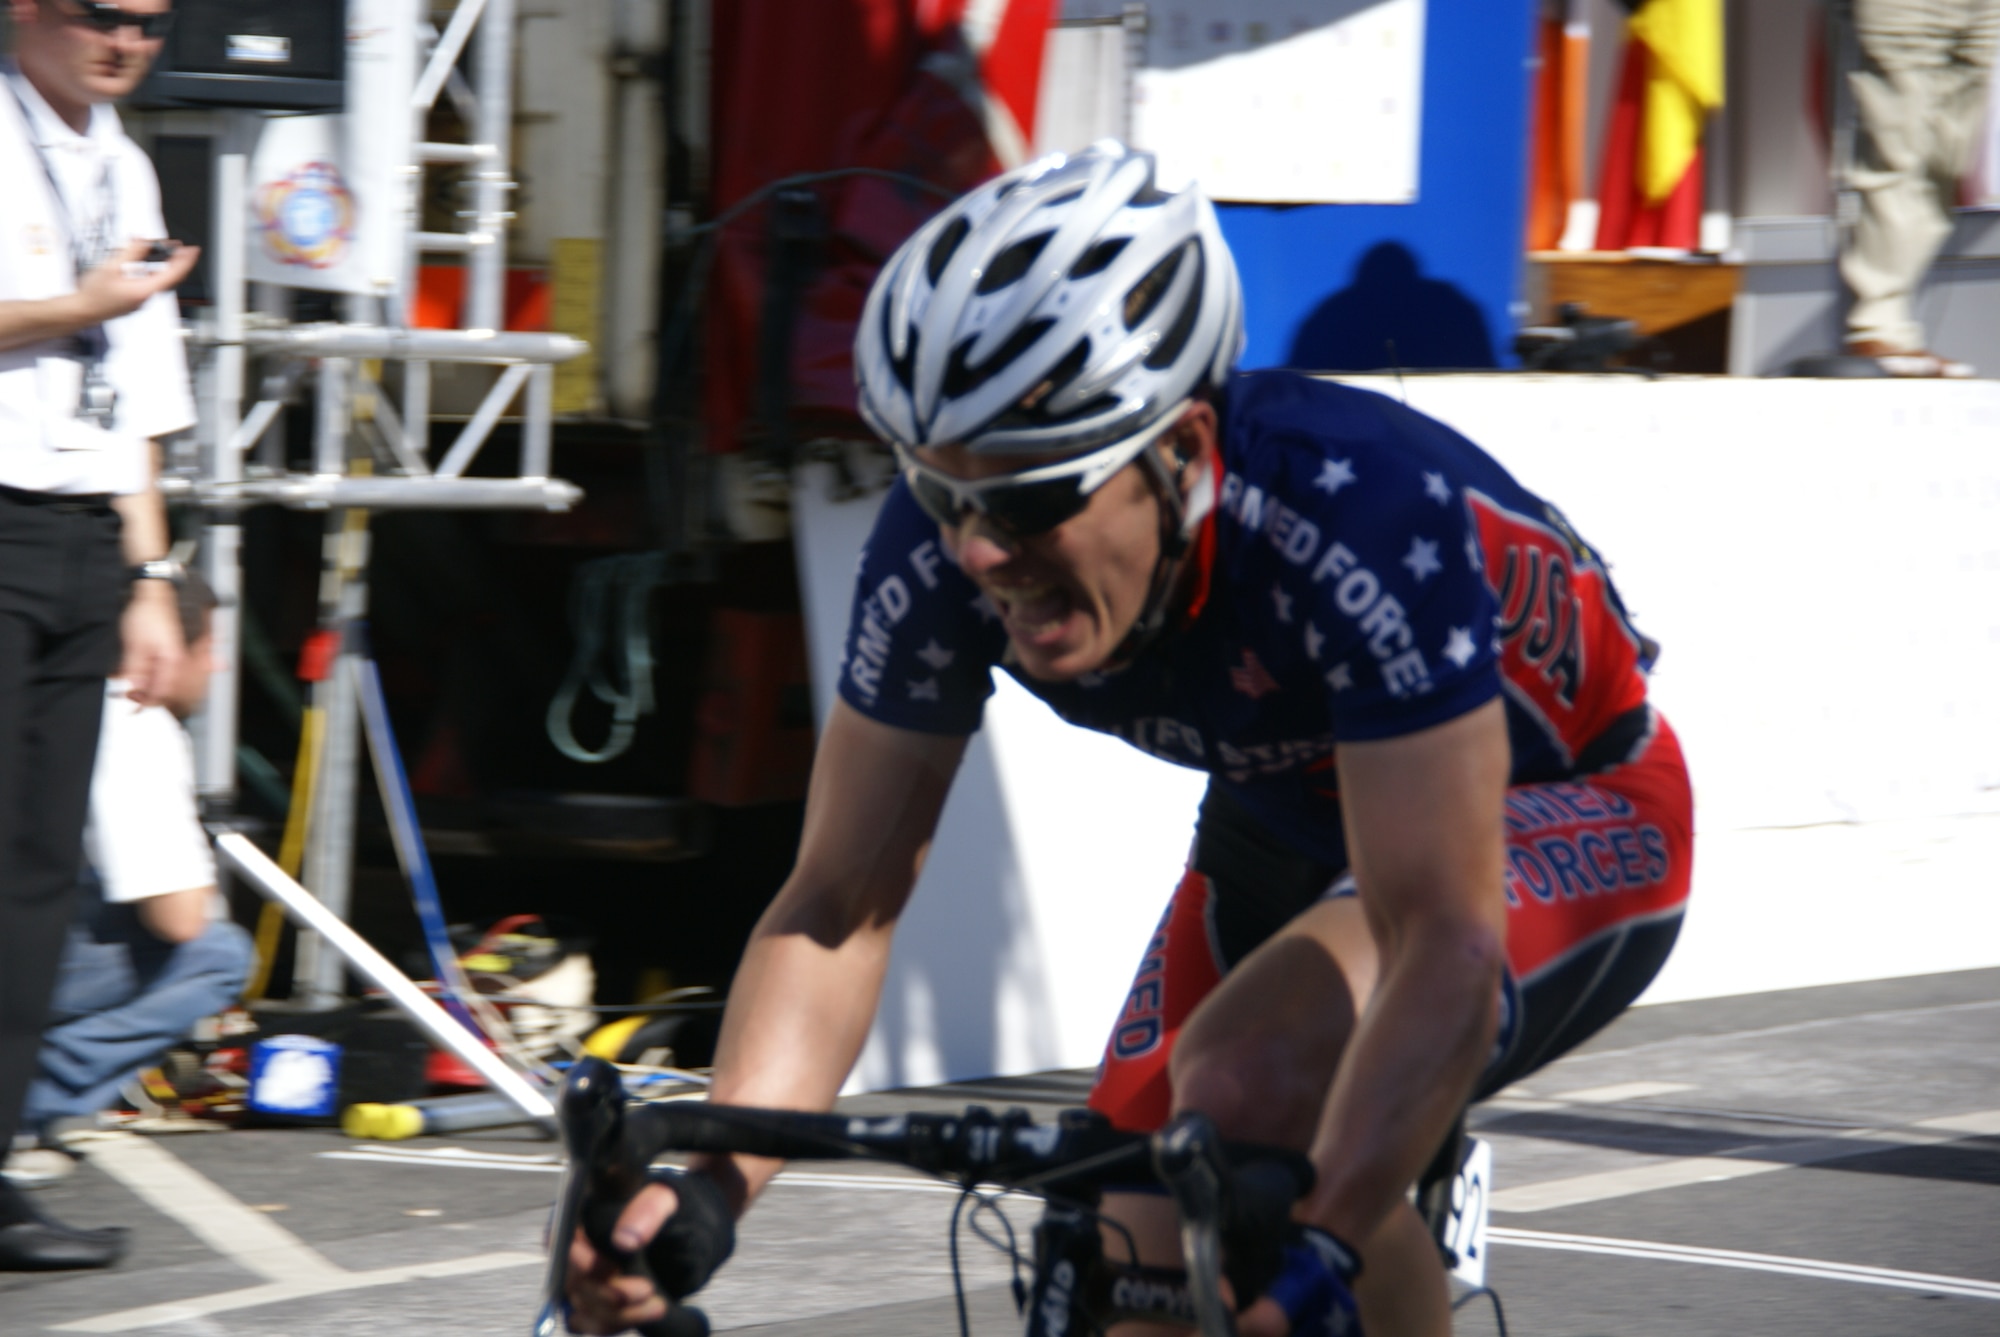 Capt. Ian Holt, 319th Missile Squadron, races for the United States cycling team at an international competition in Clonmel, Ireland, during the summer of 2009. Captain Holt trained and lived in Europe for one year while training for the event.